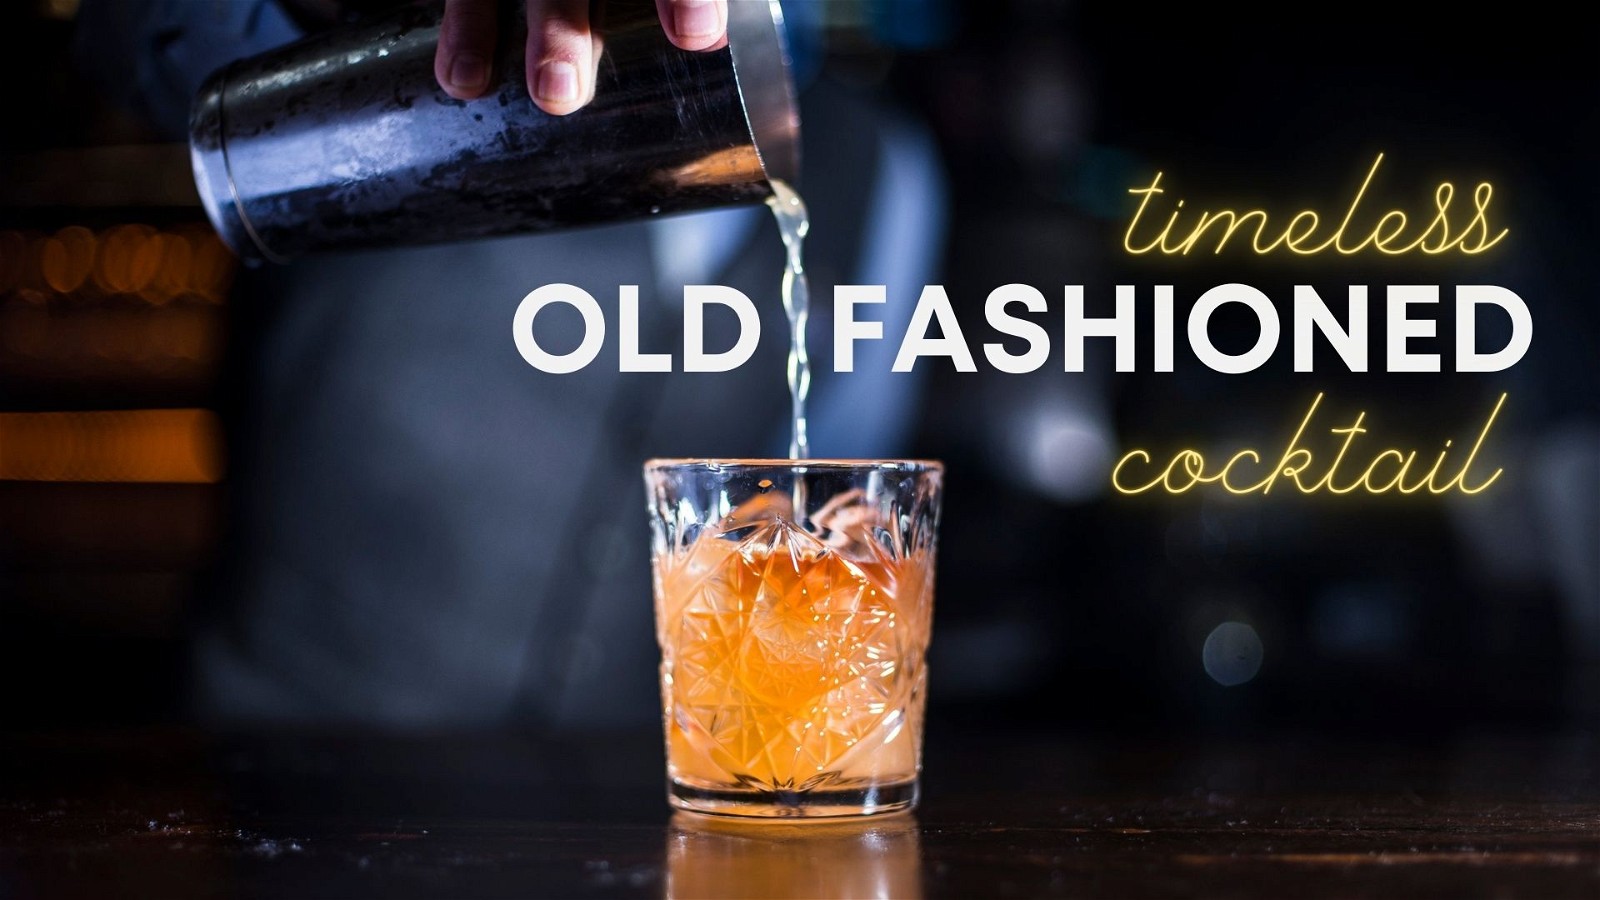 Image of The Old Fashioned